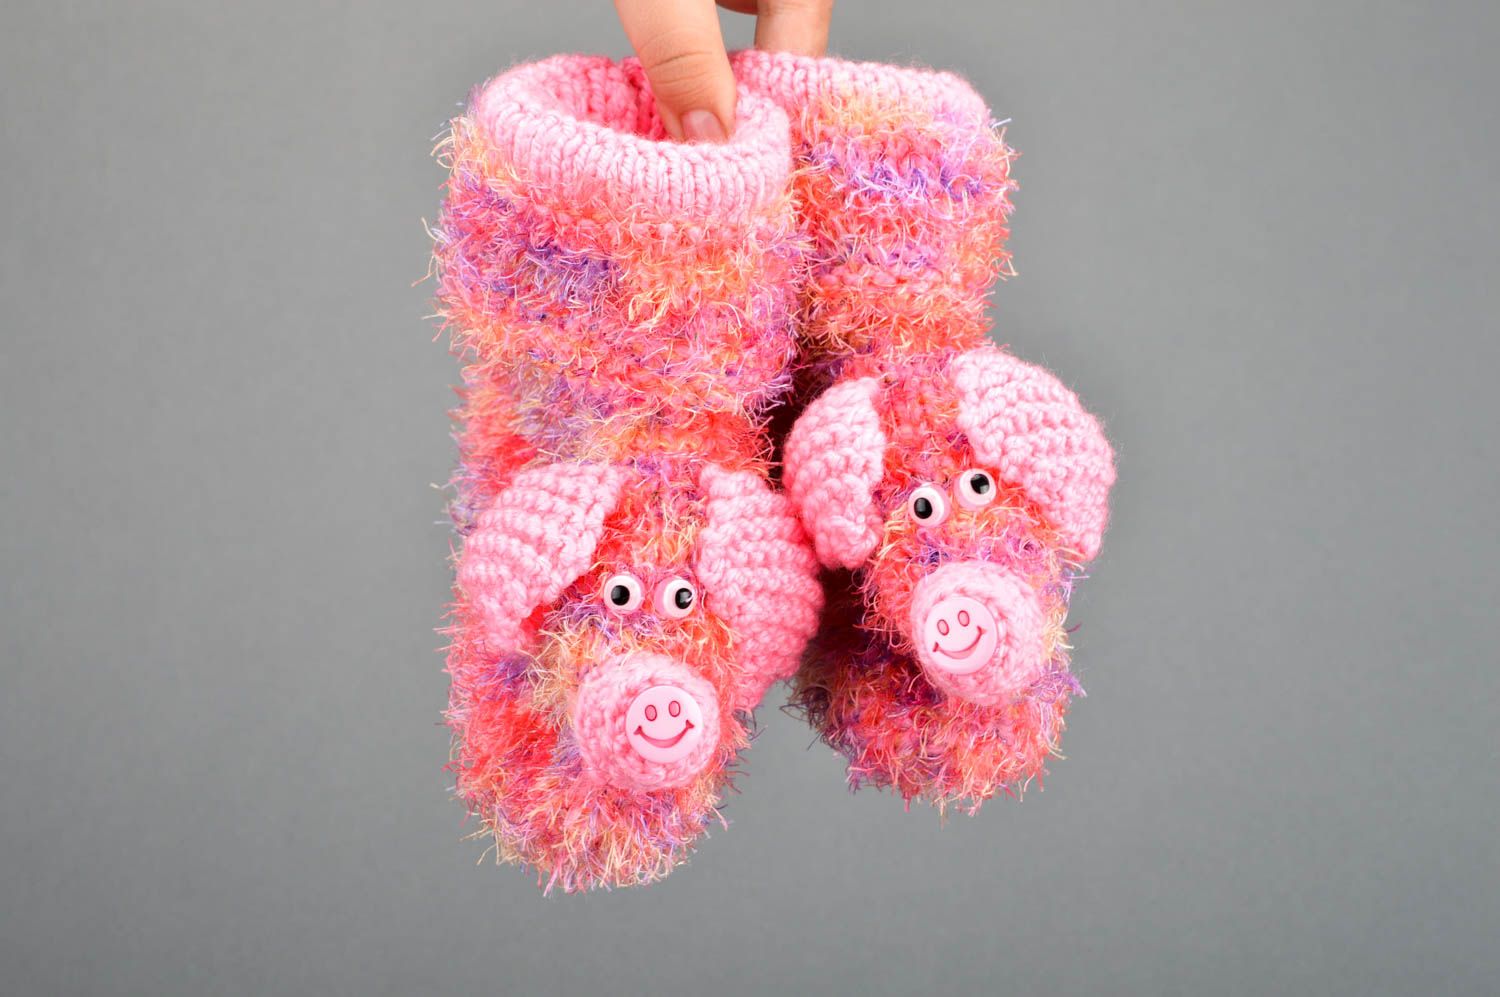 Beautiful handmade crochet slippers warm baby slippers house shoes gift ideas photo 3